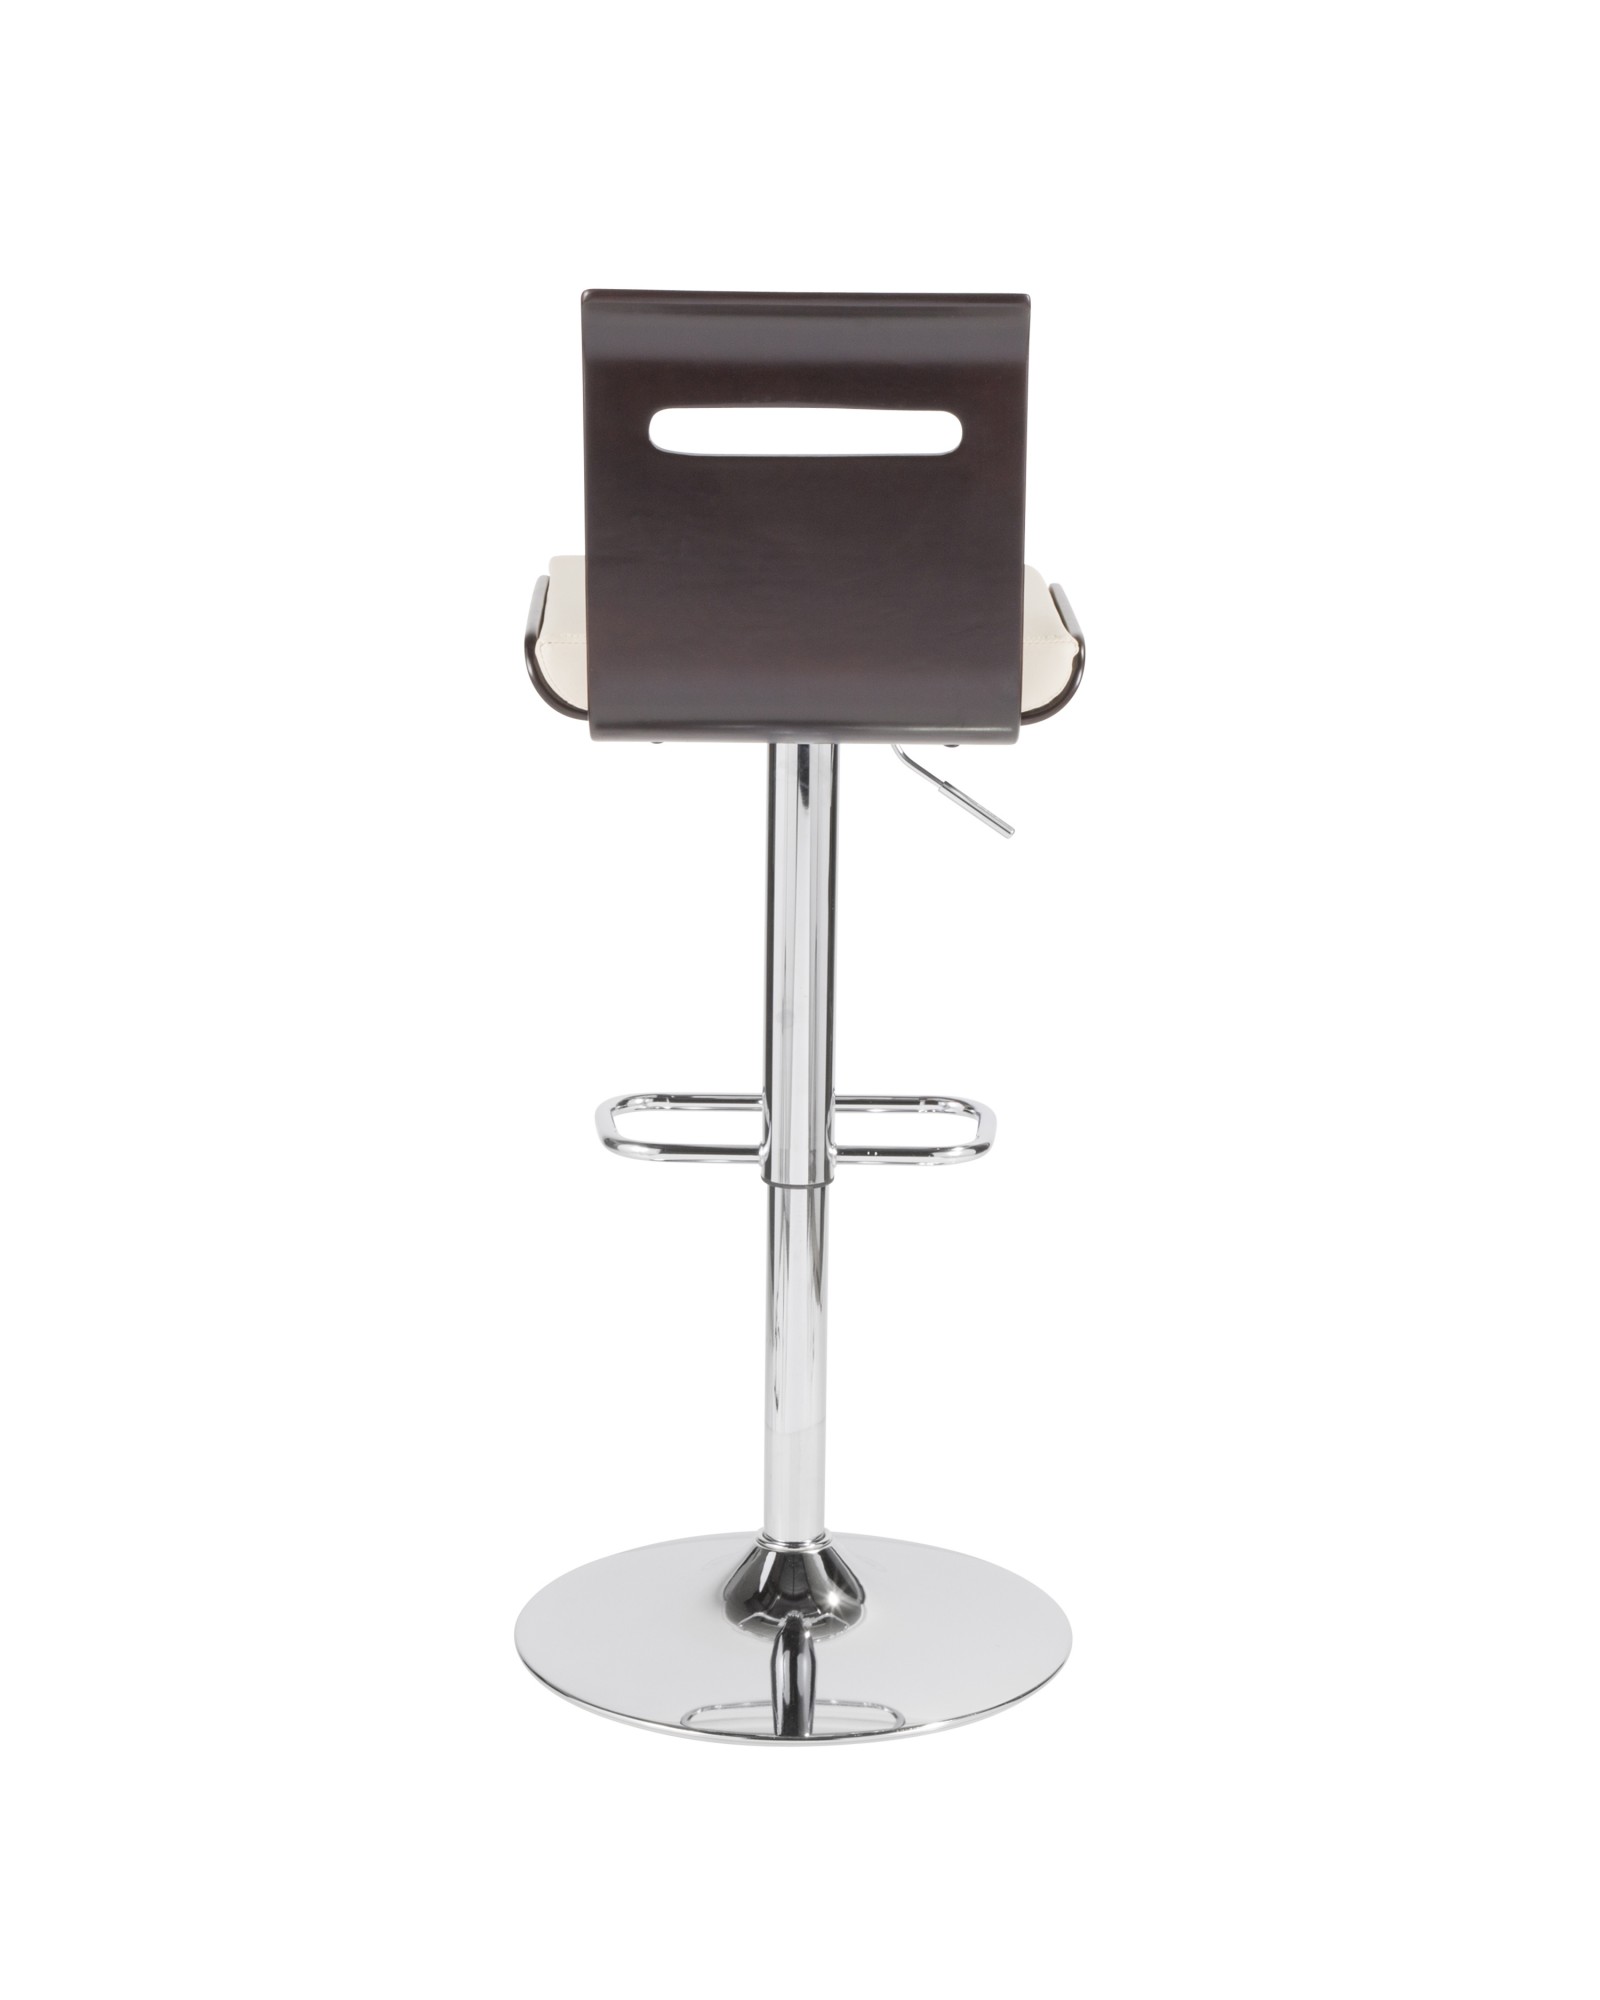 Viera Mid-Century Modern Adjustable Barstool with Swivel in Wenge and White Faux Leather